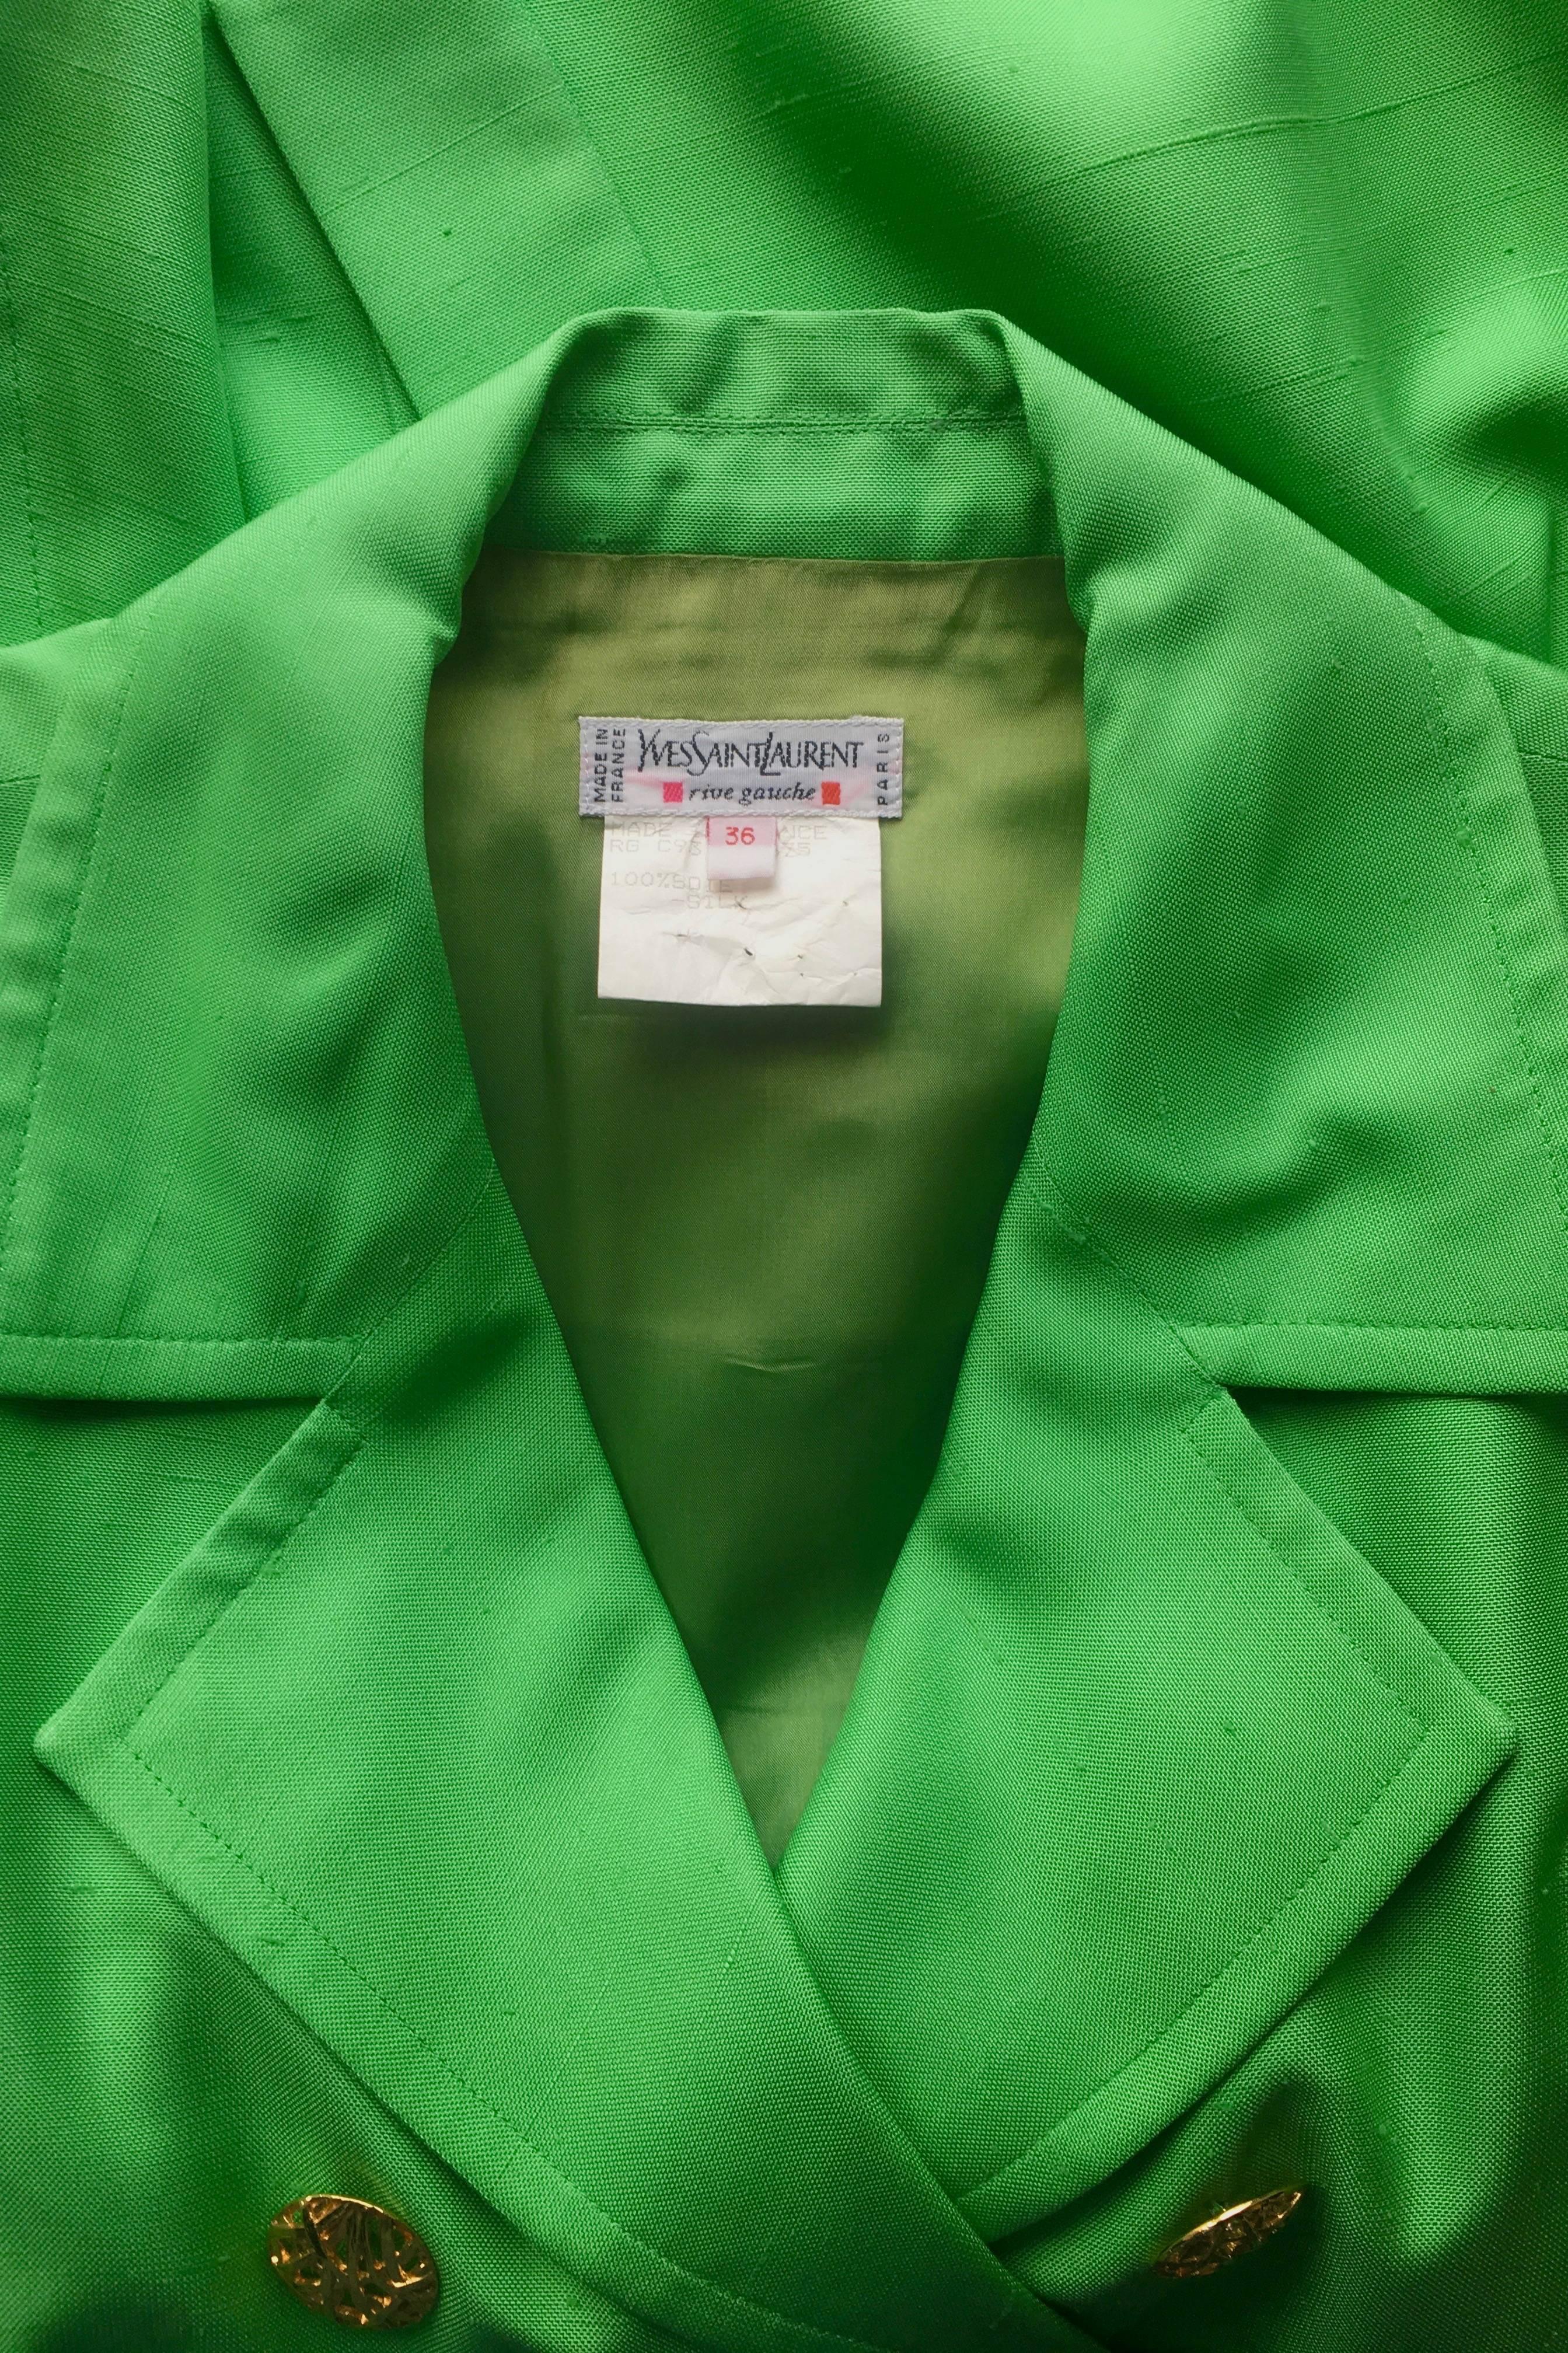 An incredible 1960s Yves Saint Laurent Rive Gauche bright green silk trench coat with a nipped in waist and double-breasted closure. The stunning coat comes with a matching waist belt with a gold buckle closure, which beautifully matches the